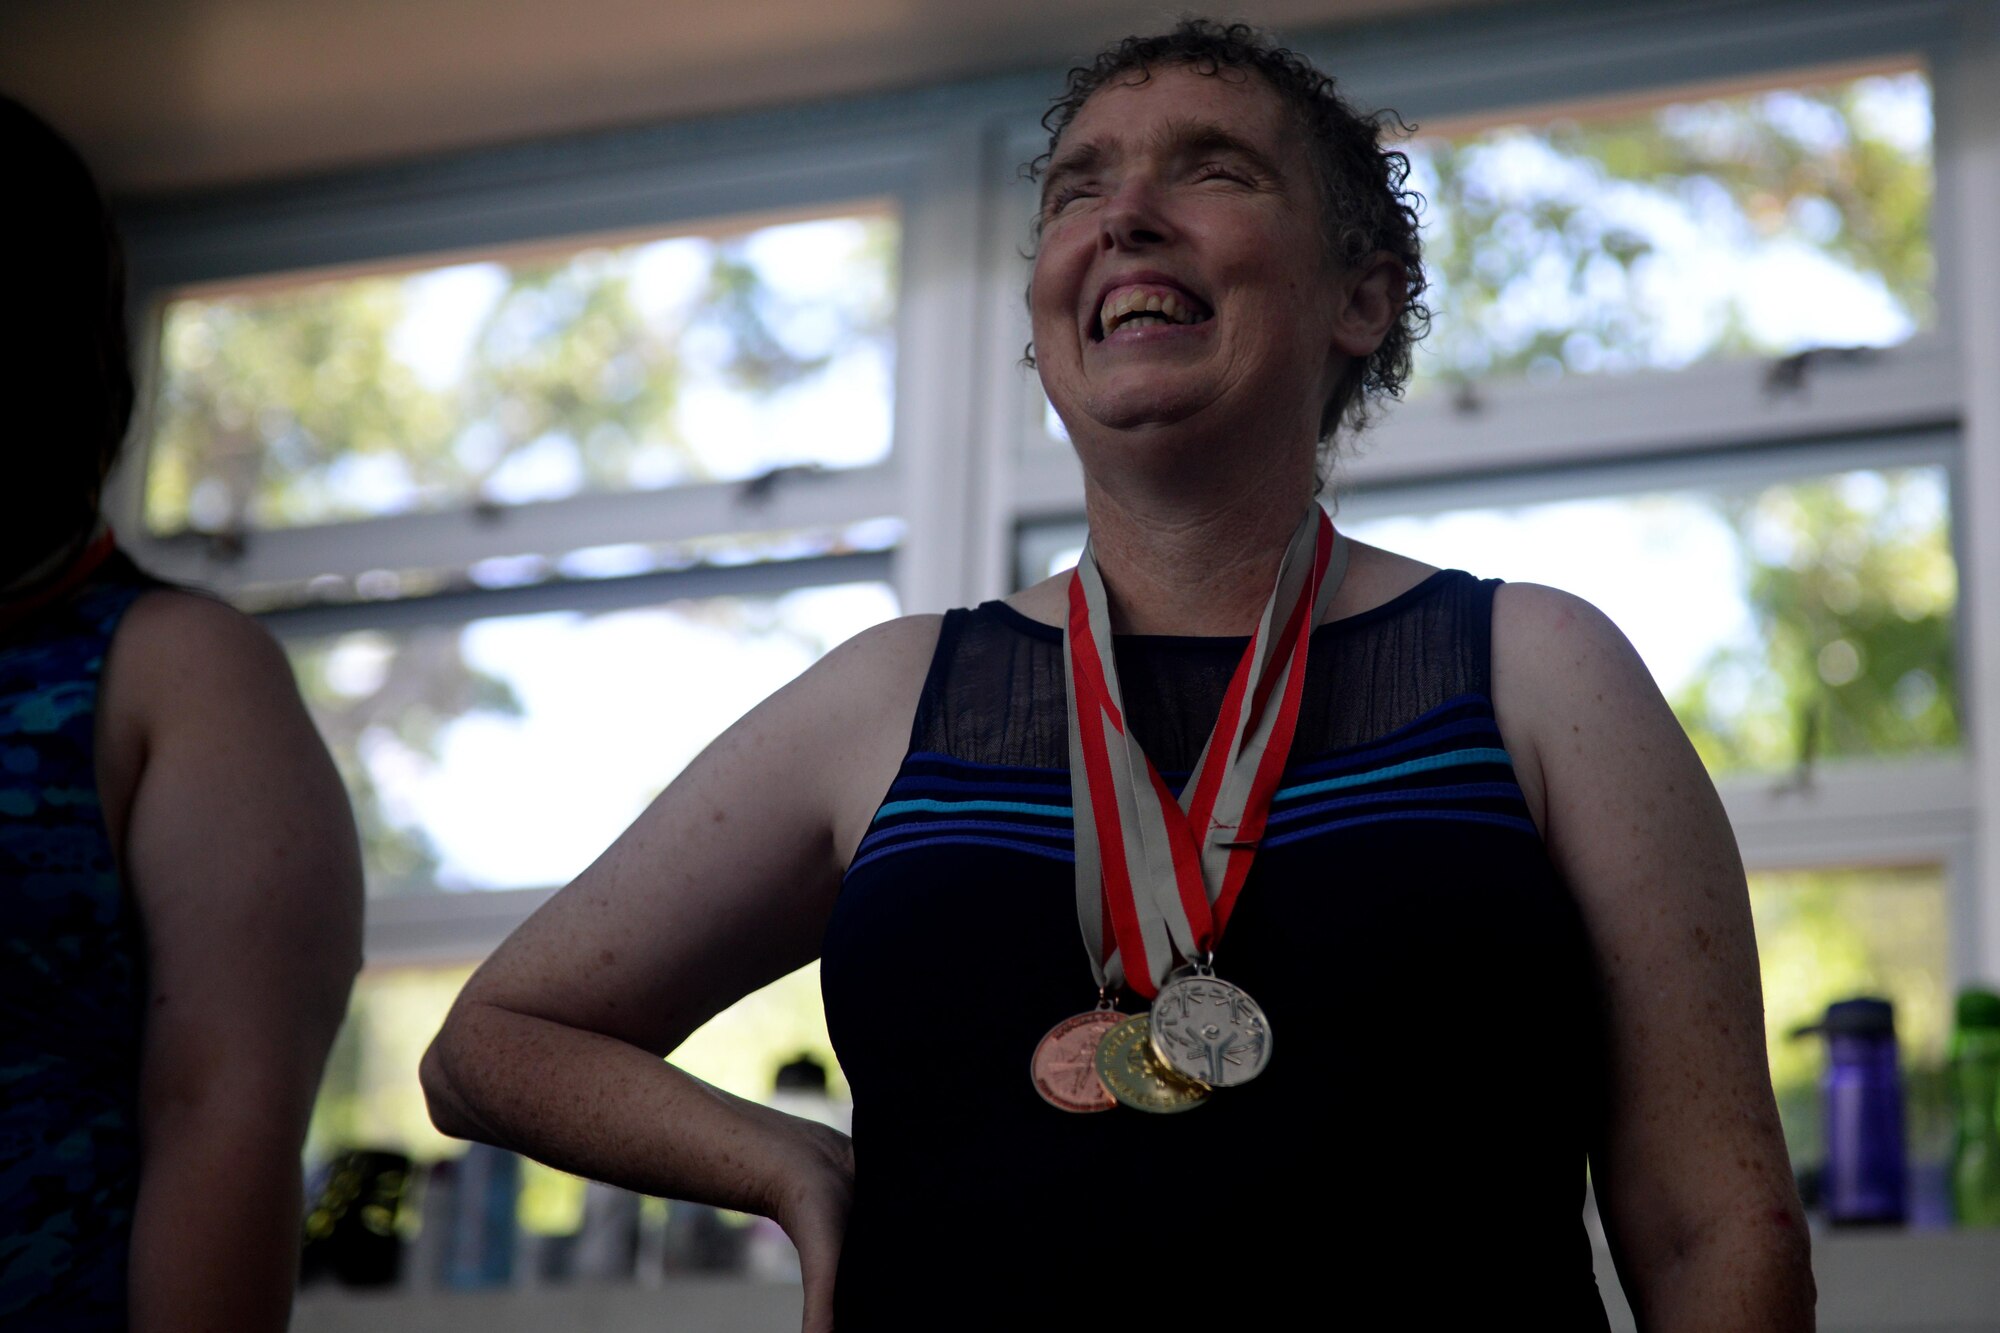 Paula Carpenter, District 5 Special Olympics Mississippi athlete, stands on the podium after receiving a medal at the Biloxi Natatorium May 21, 2016, Biloxi, Miss. Carpenter has been competing in SOMS for more than 25 years. This year she earned bronze in the 25 meter freestyle relay, silver in the 50 meter freestyle and gold in the 50 meter backstroke. (U.S. Air Force photo by Airman 1st Class Travis Beihl)